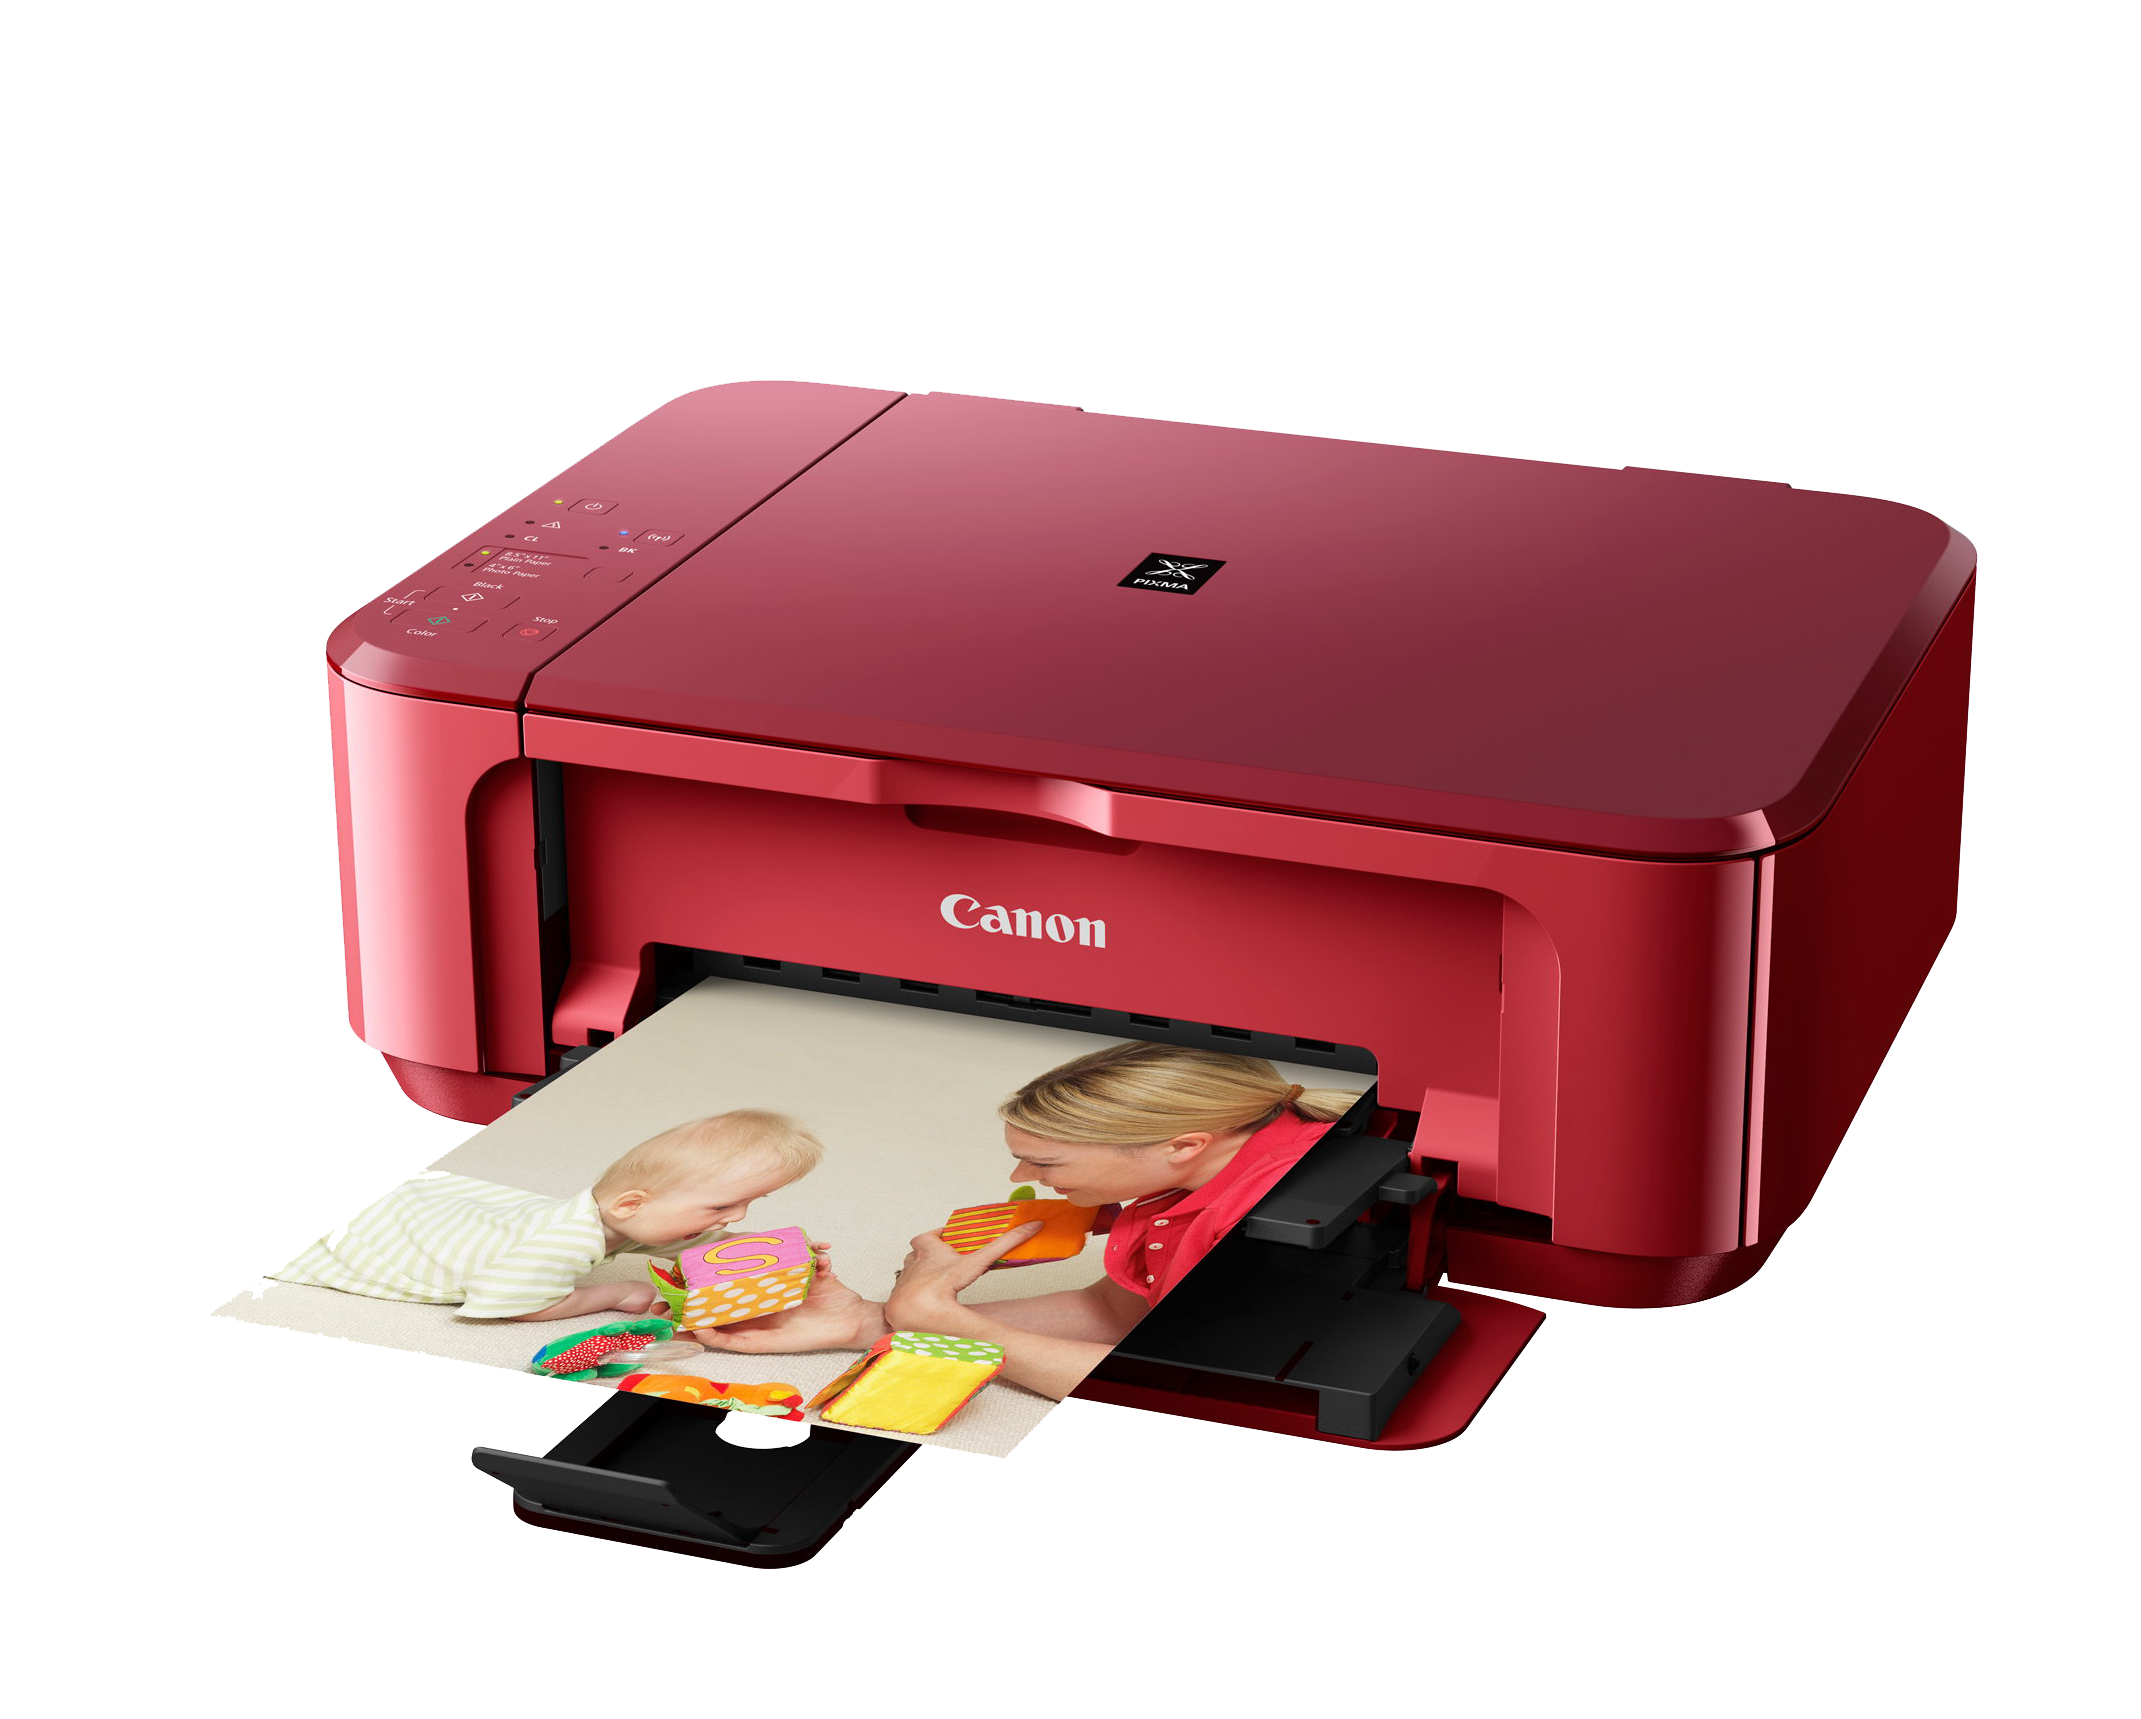 Red Canon Printer PNG in Transparent